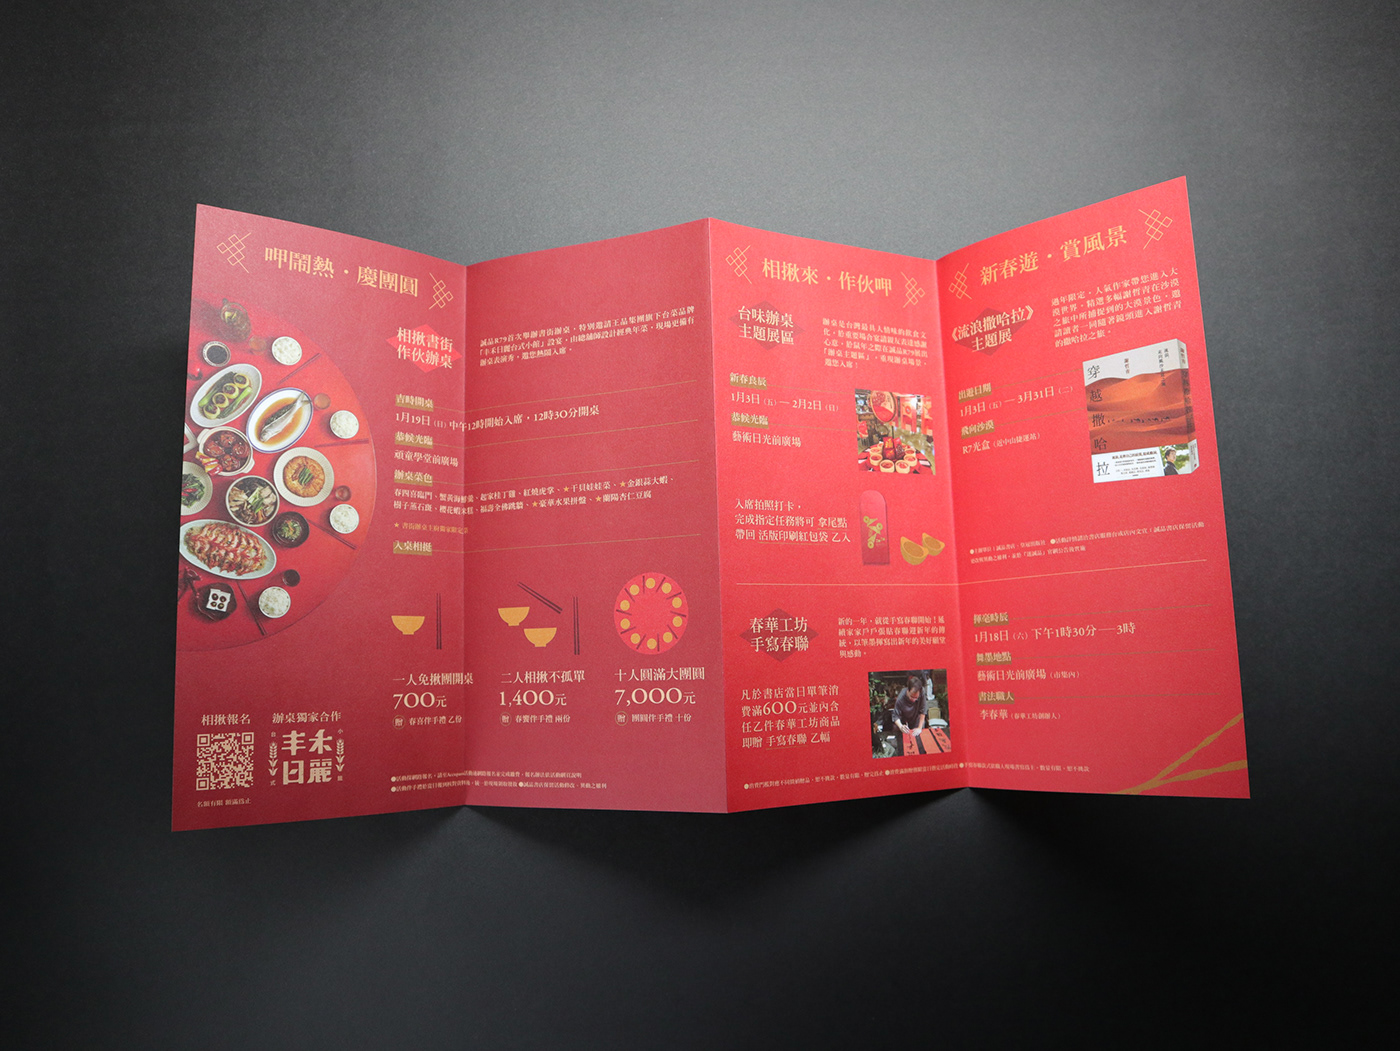 chinese new year design eslite Food  graphic design  ILLUSTRATION  pan toh red roadside banquet pamphlet